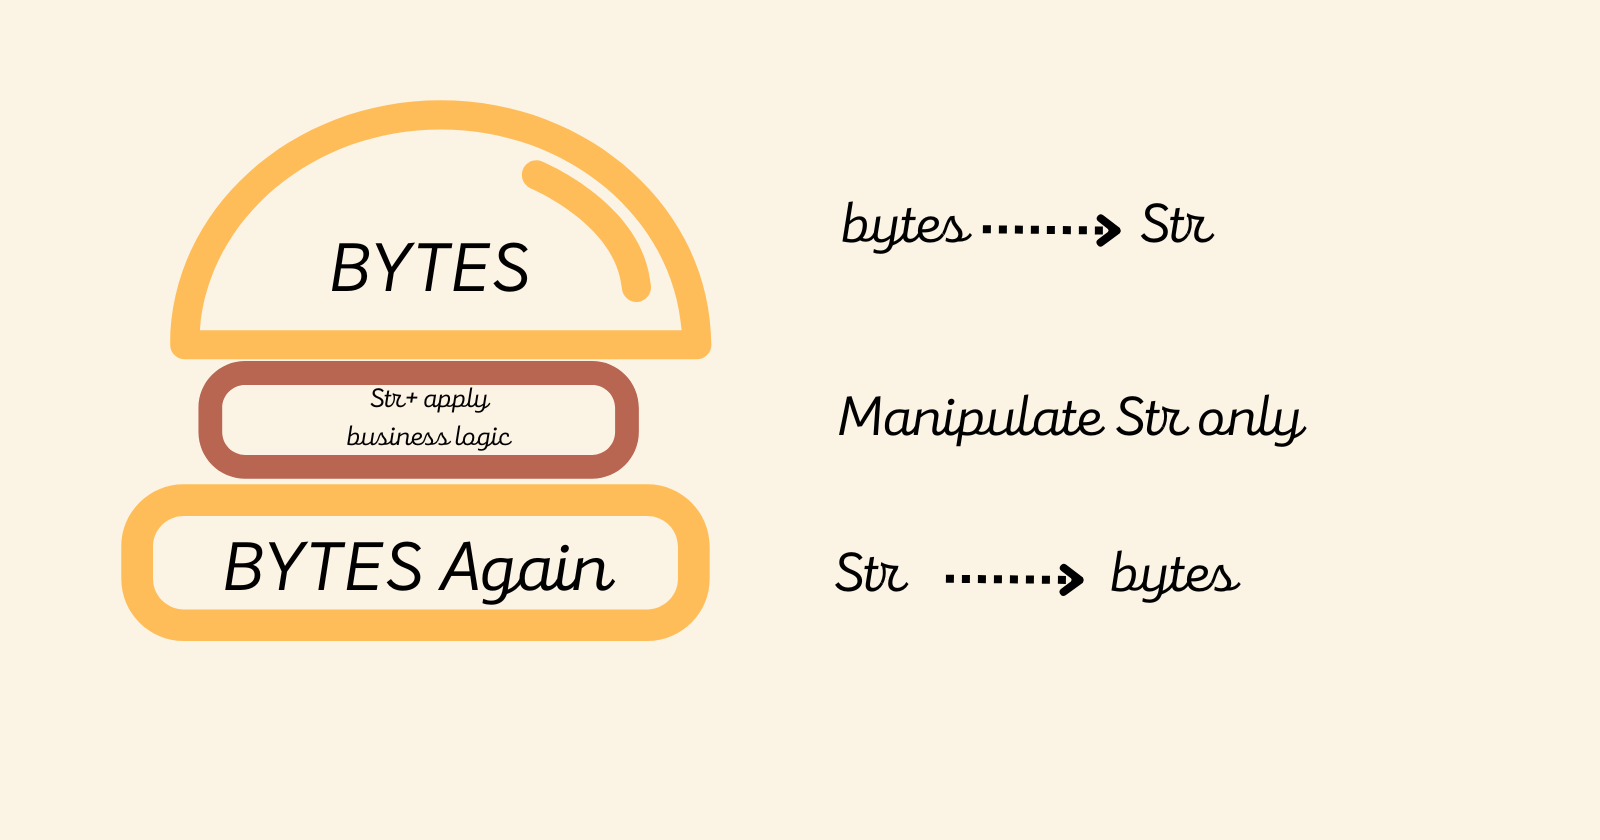 The Unicode Sandwich: Current Best Practice to Handling Text in Python